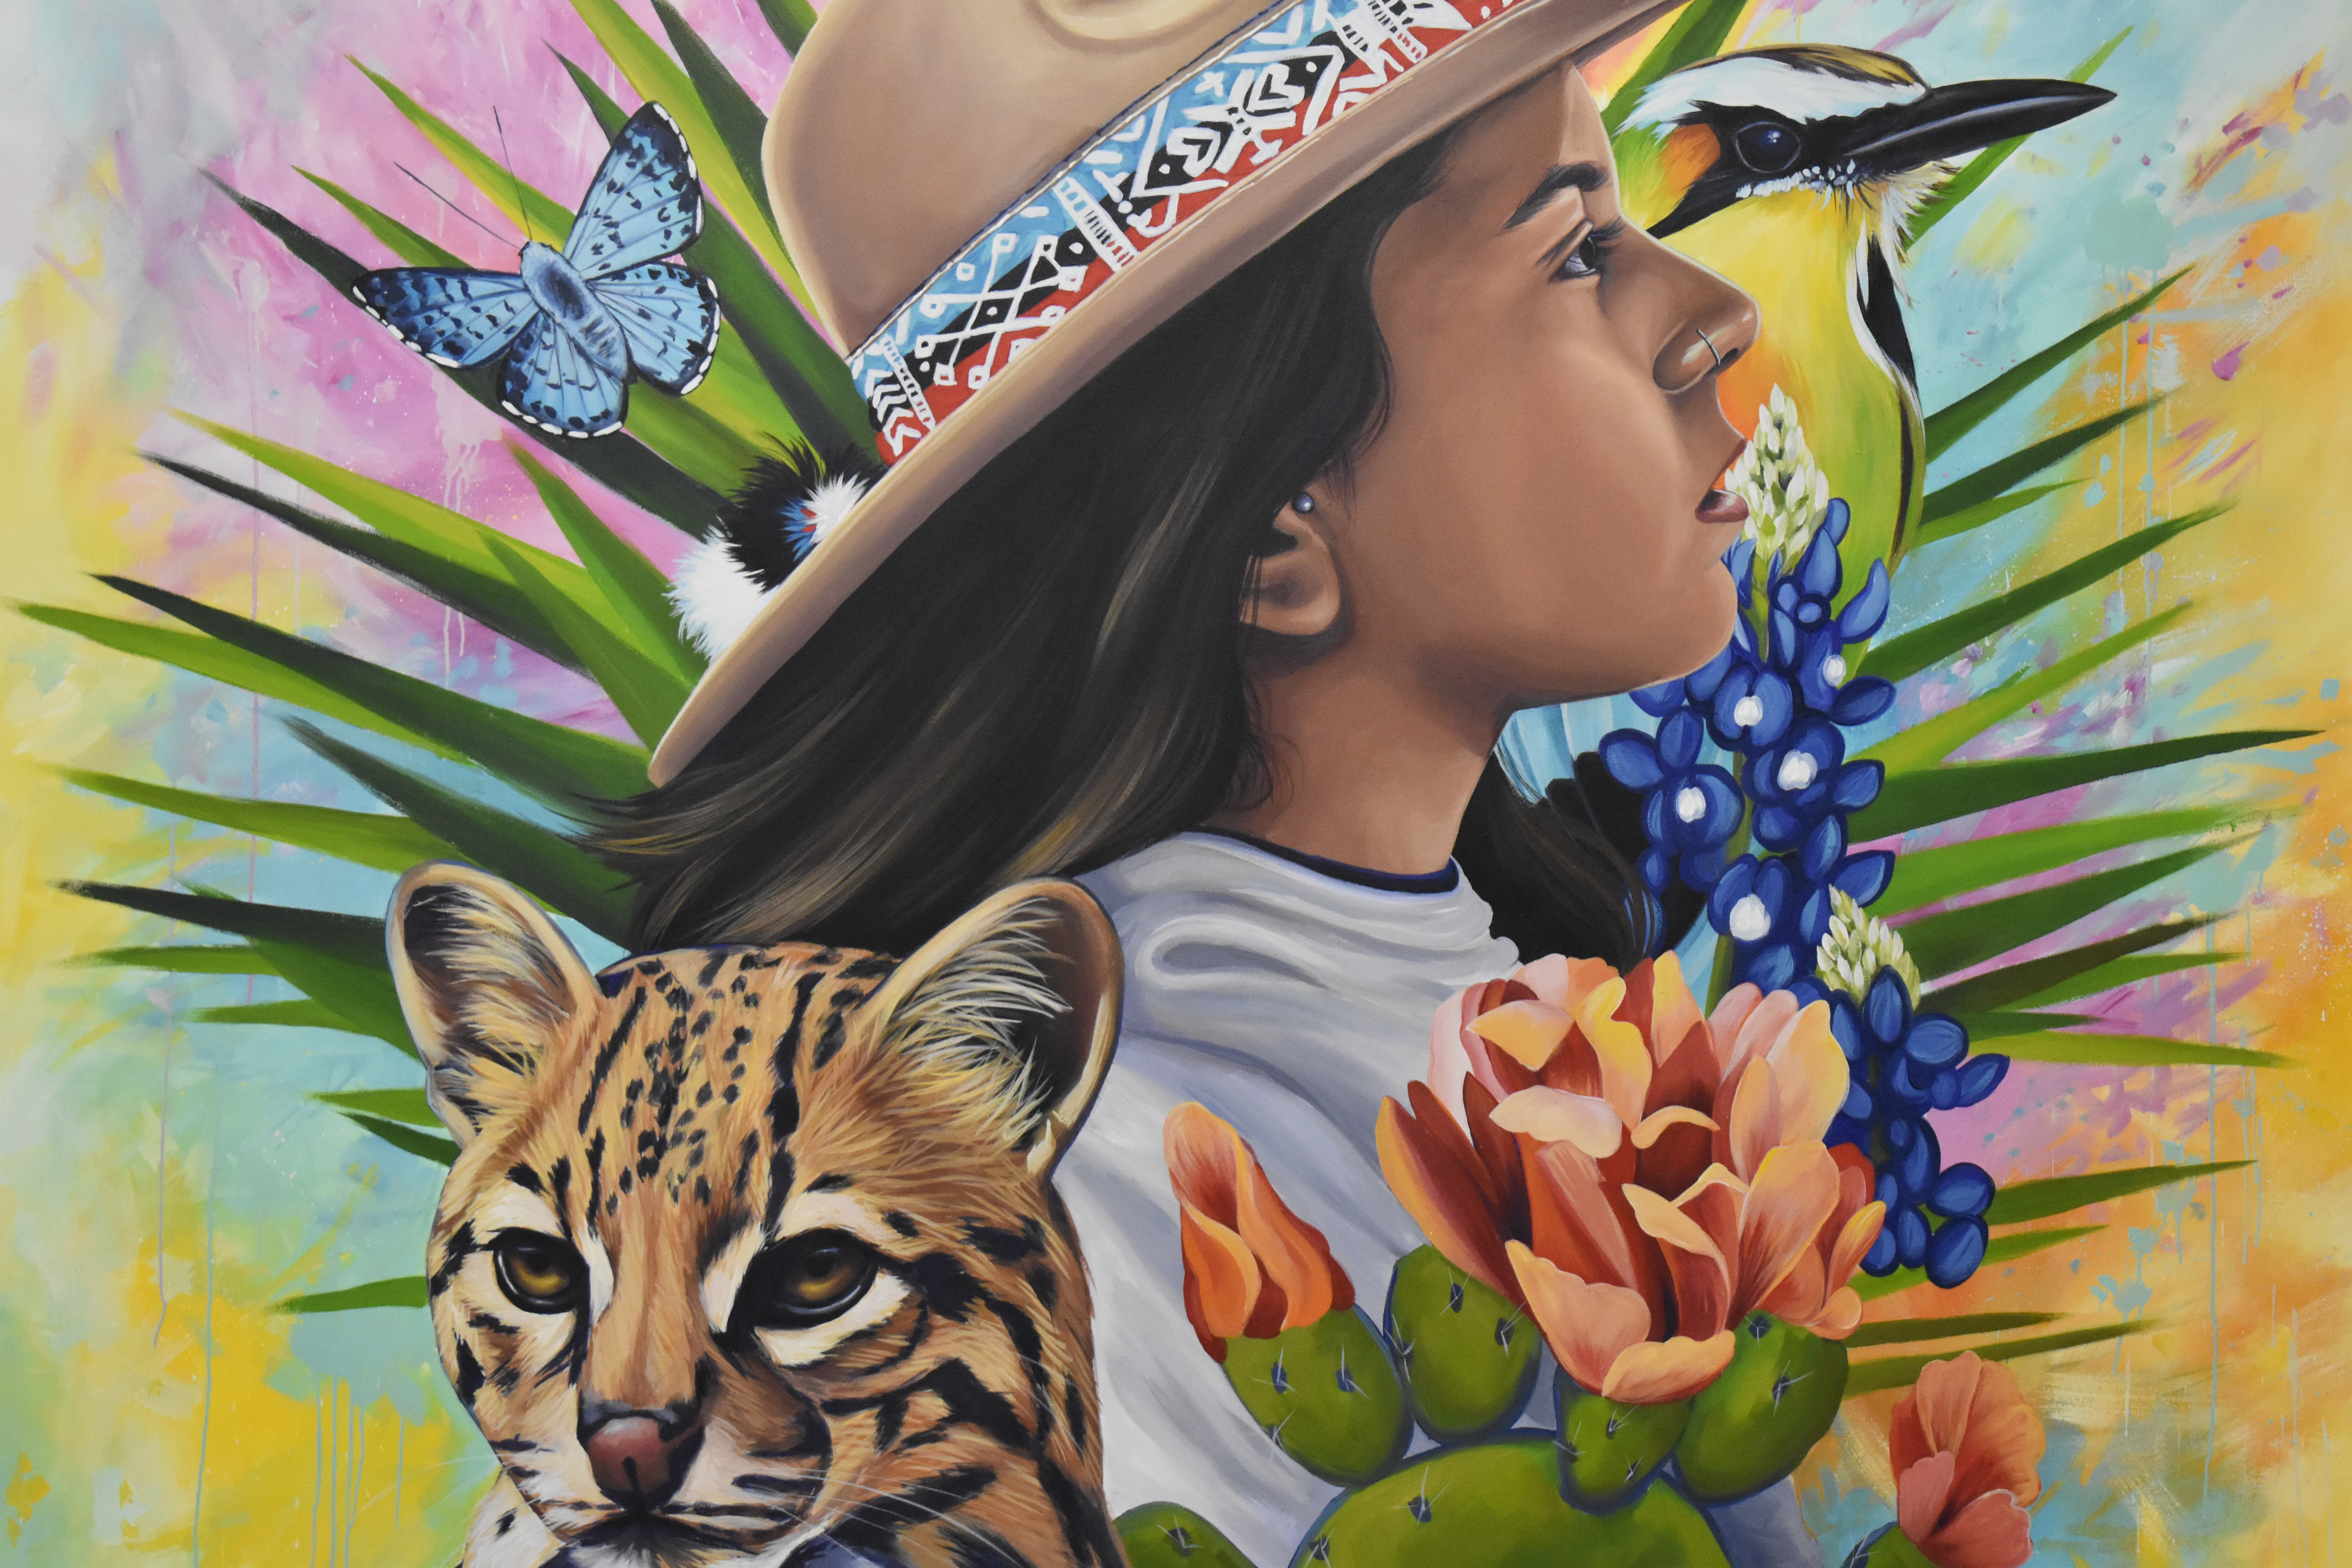 A self portrait of the artist, Elizabeth Umanzor, surrounded by colorful South American foliage and animals.